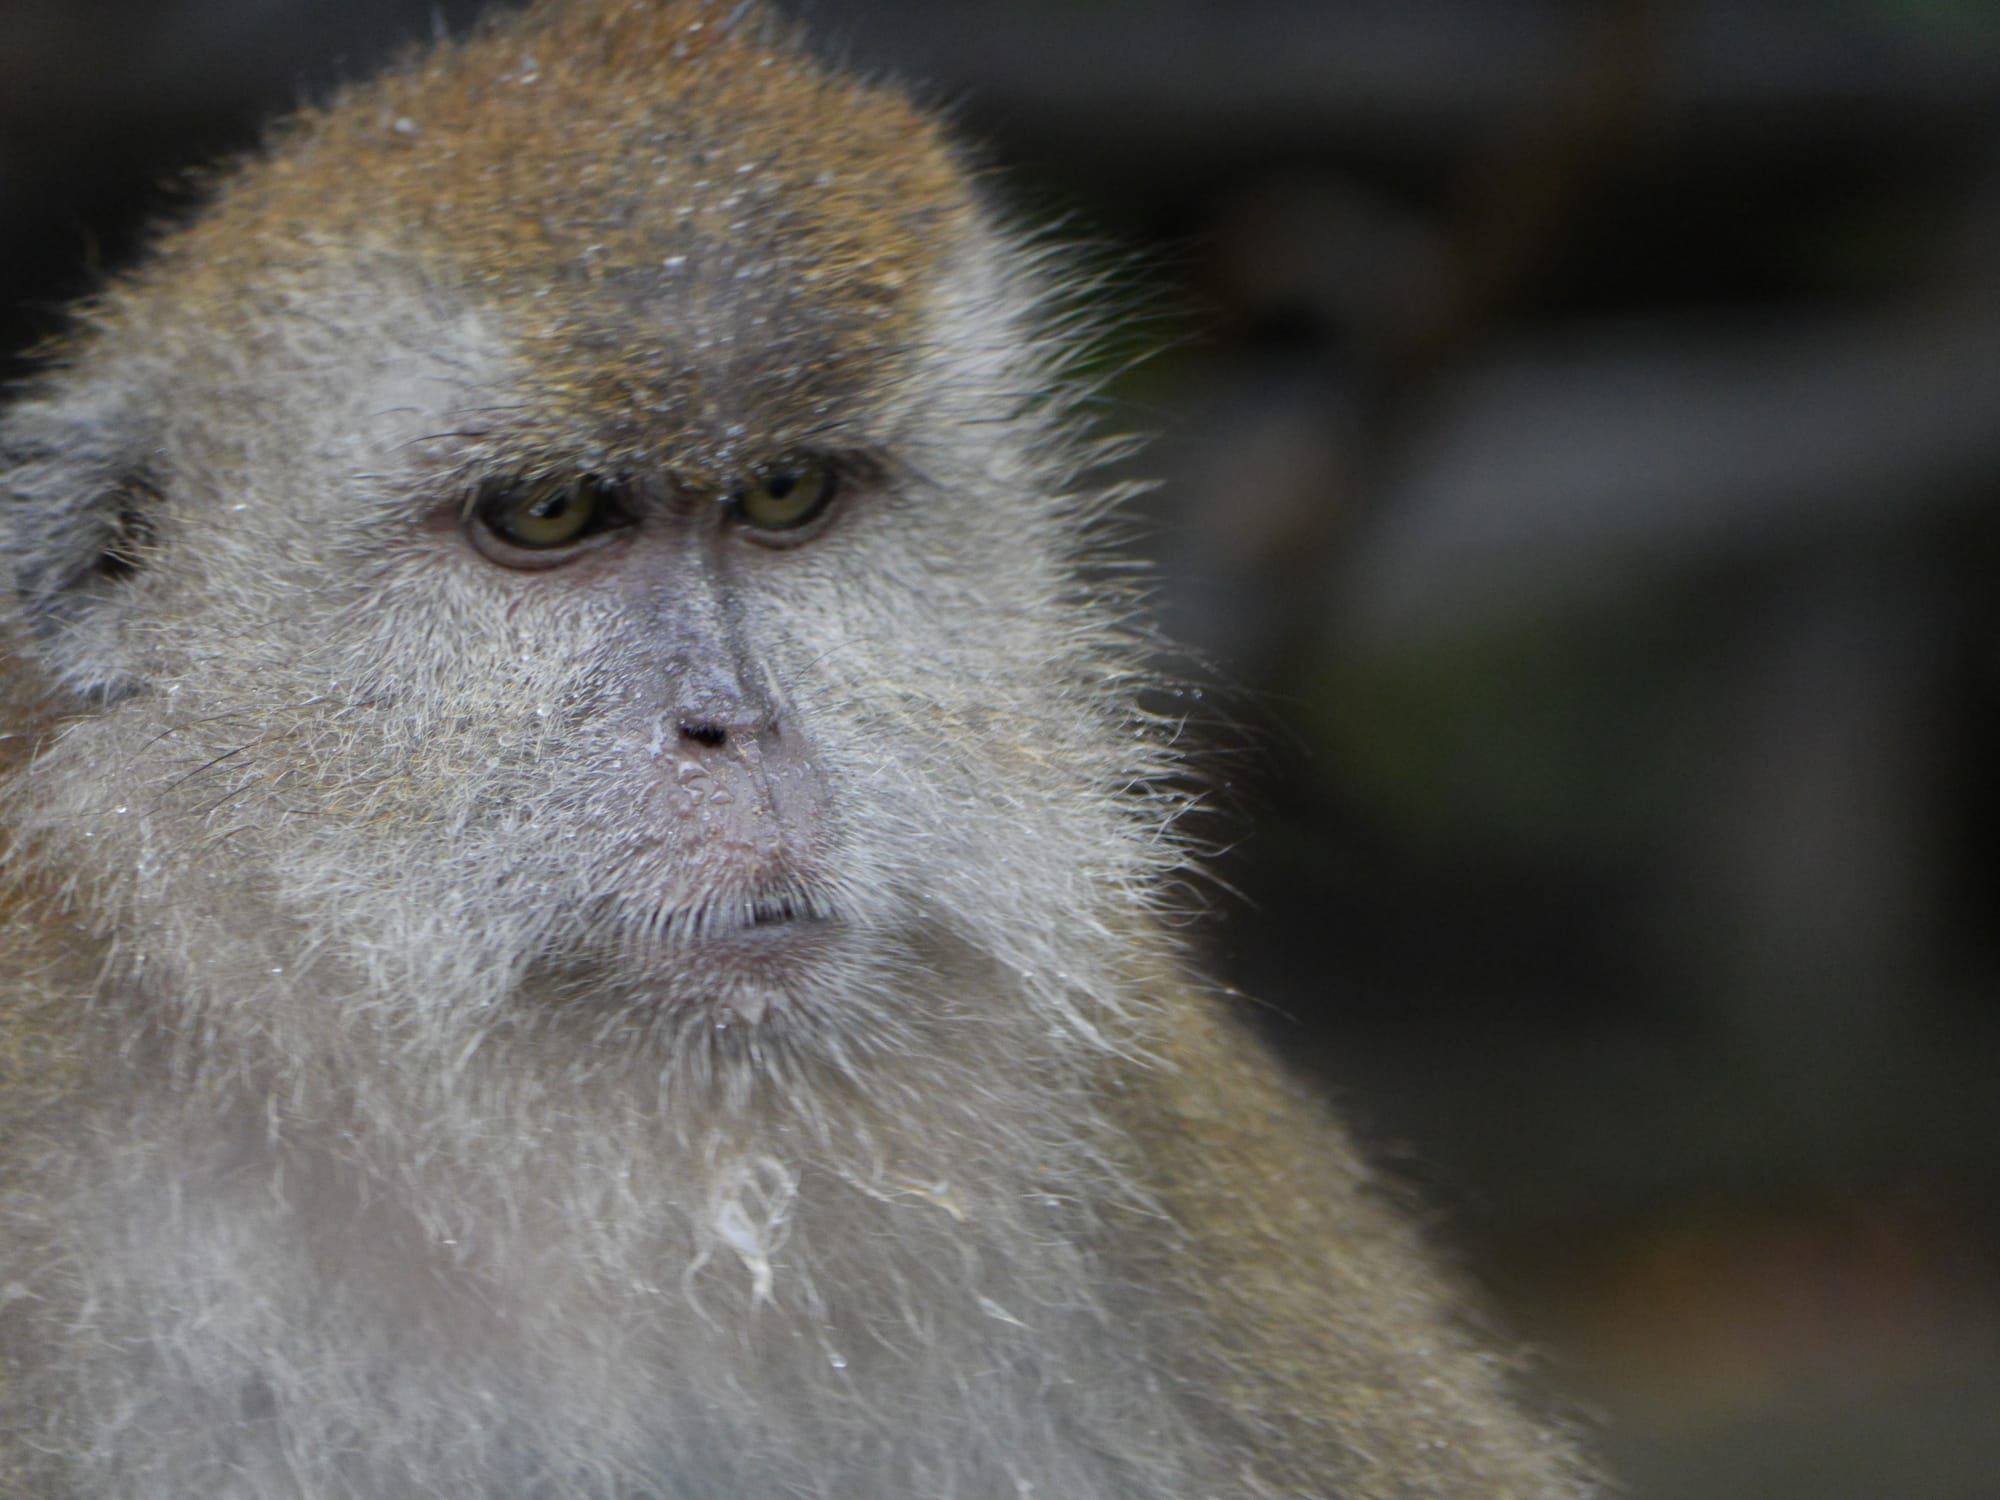 Photo by Author — a damp monkey in the swamp — Tg Rhu Mangrove Tour, Langkawi, Malaysia